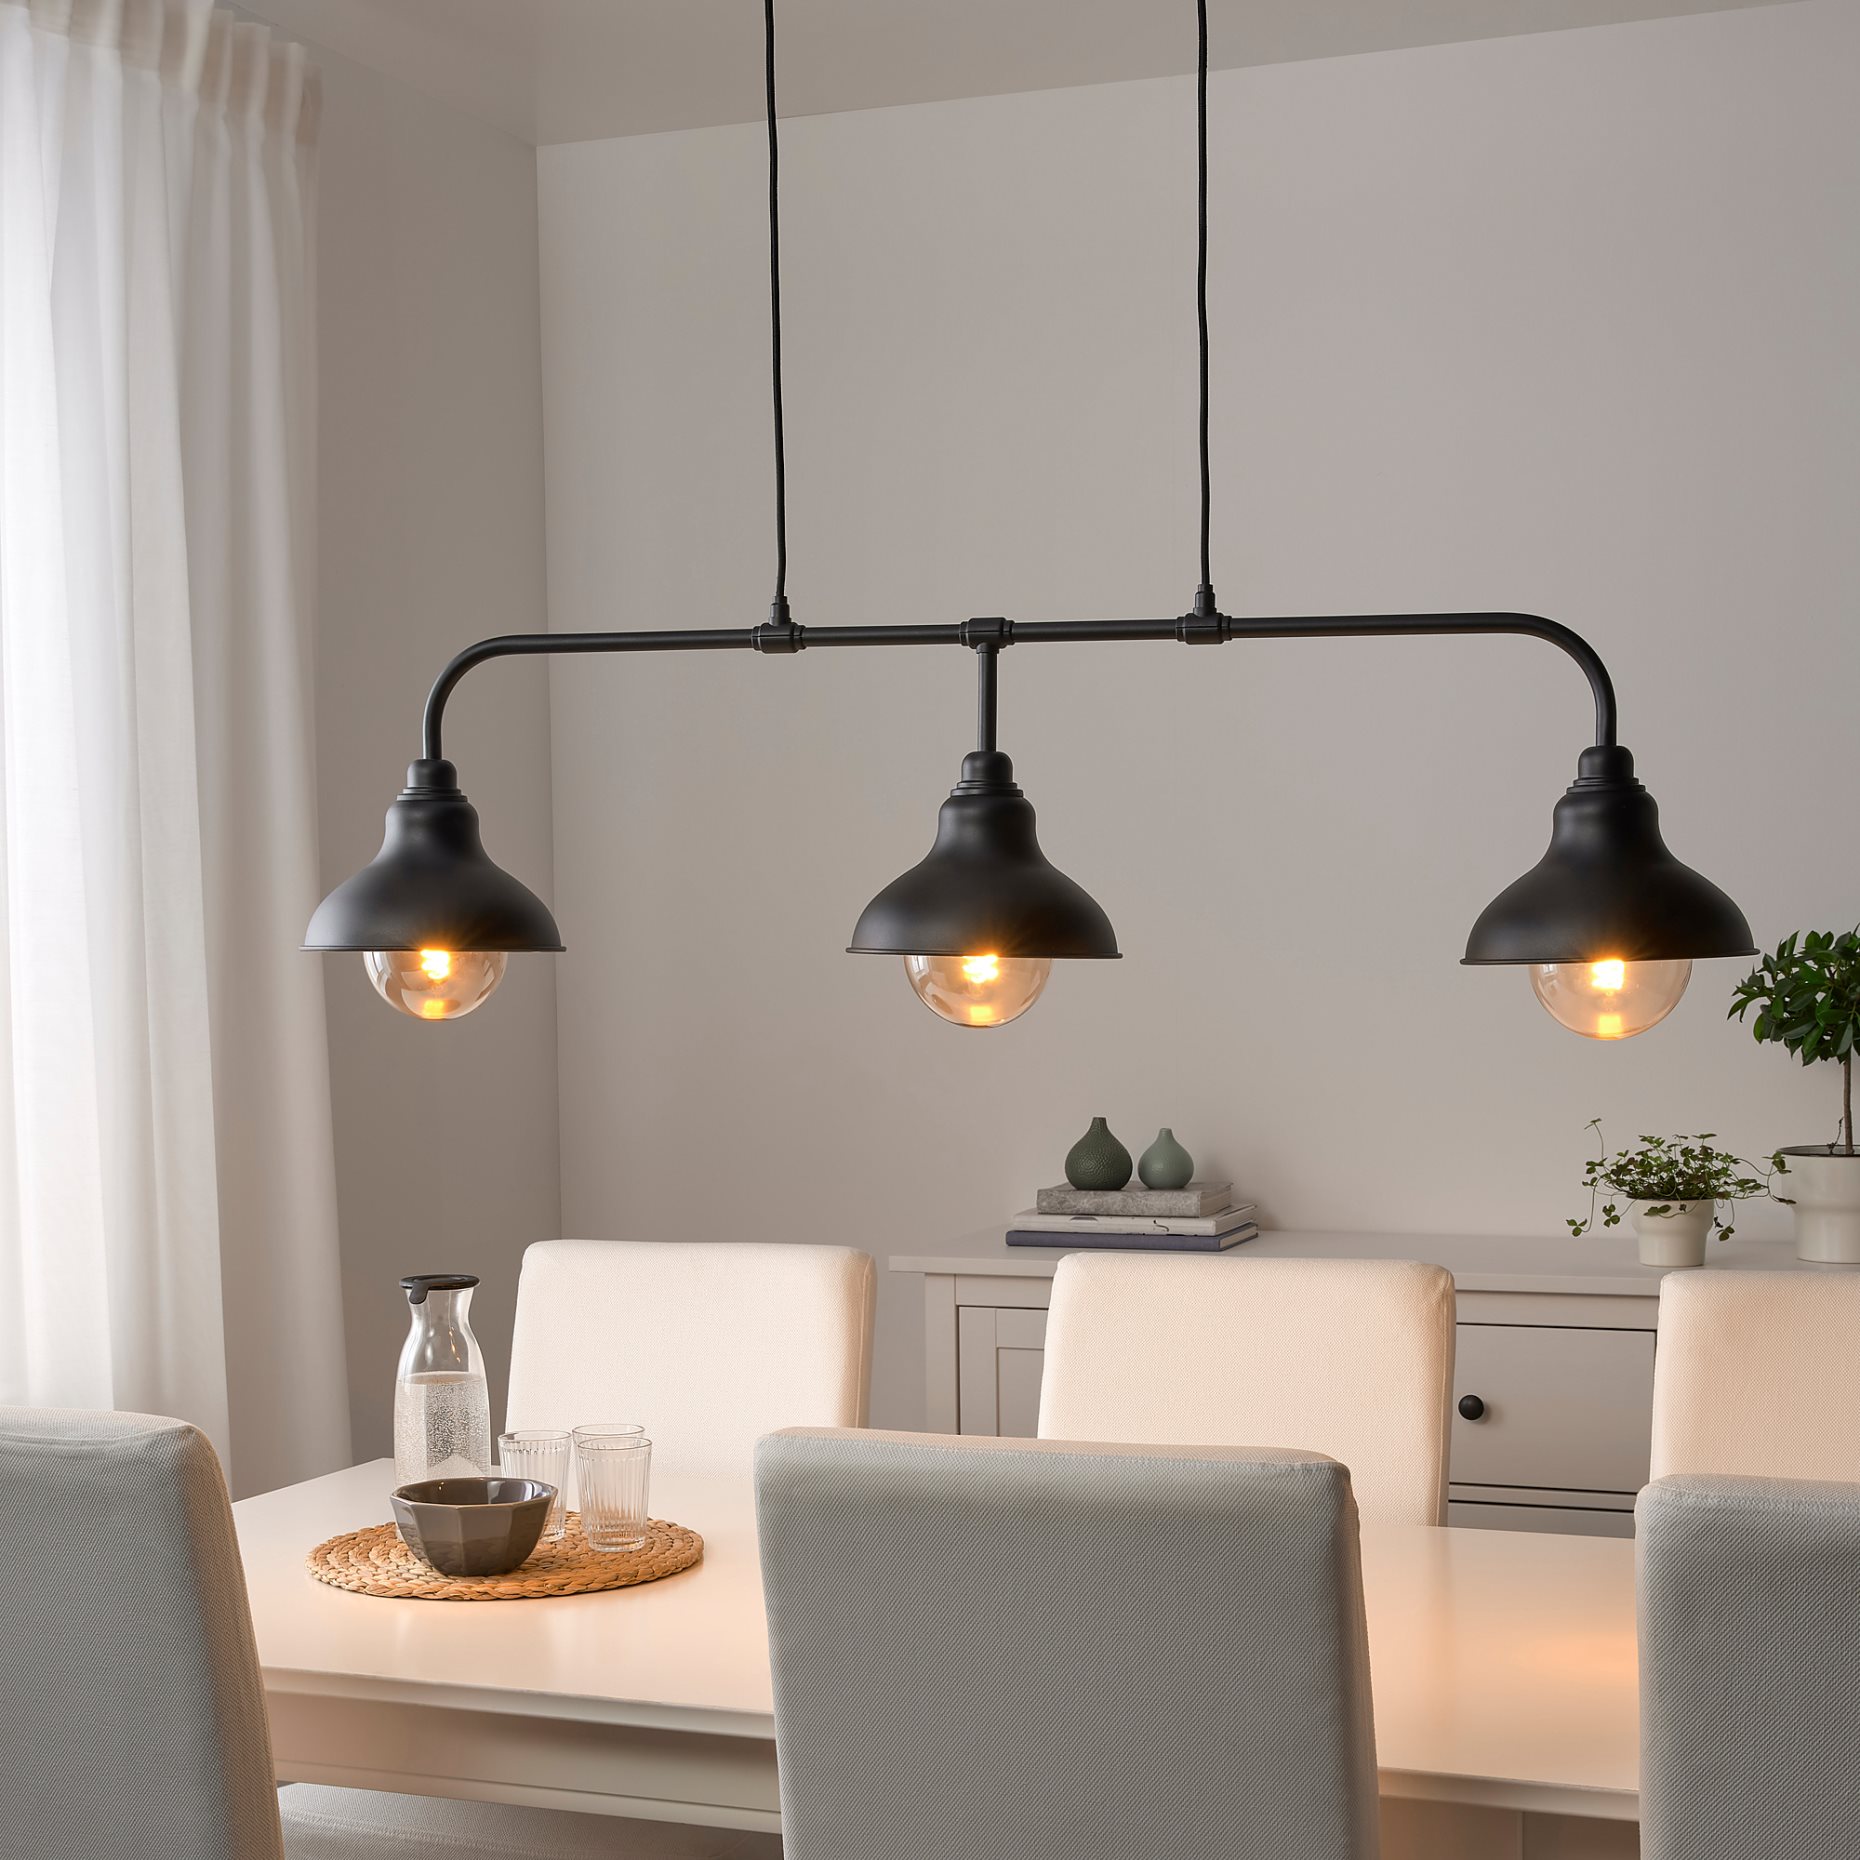 AGUNNARYD, pendant lamp with 3 lamps, 303.421.63